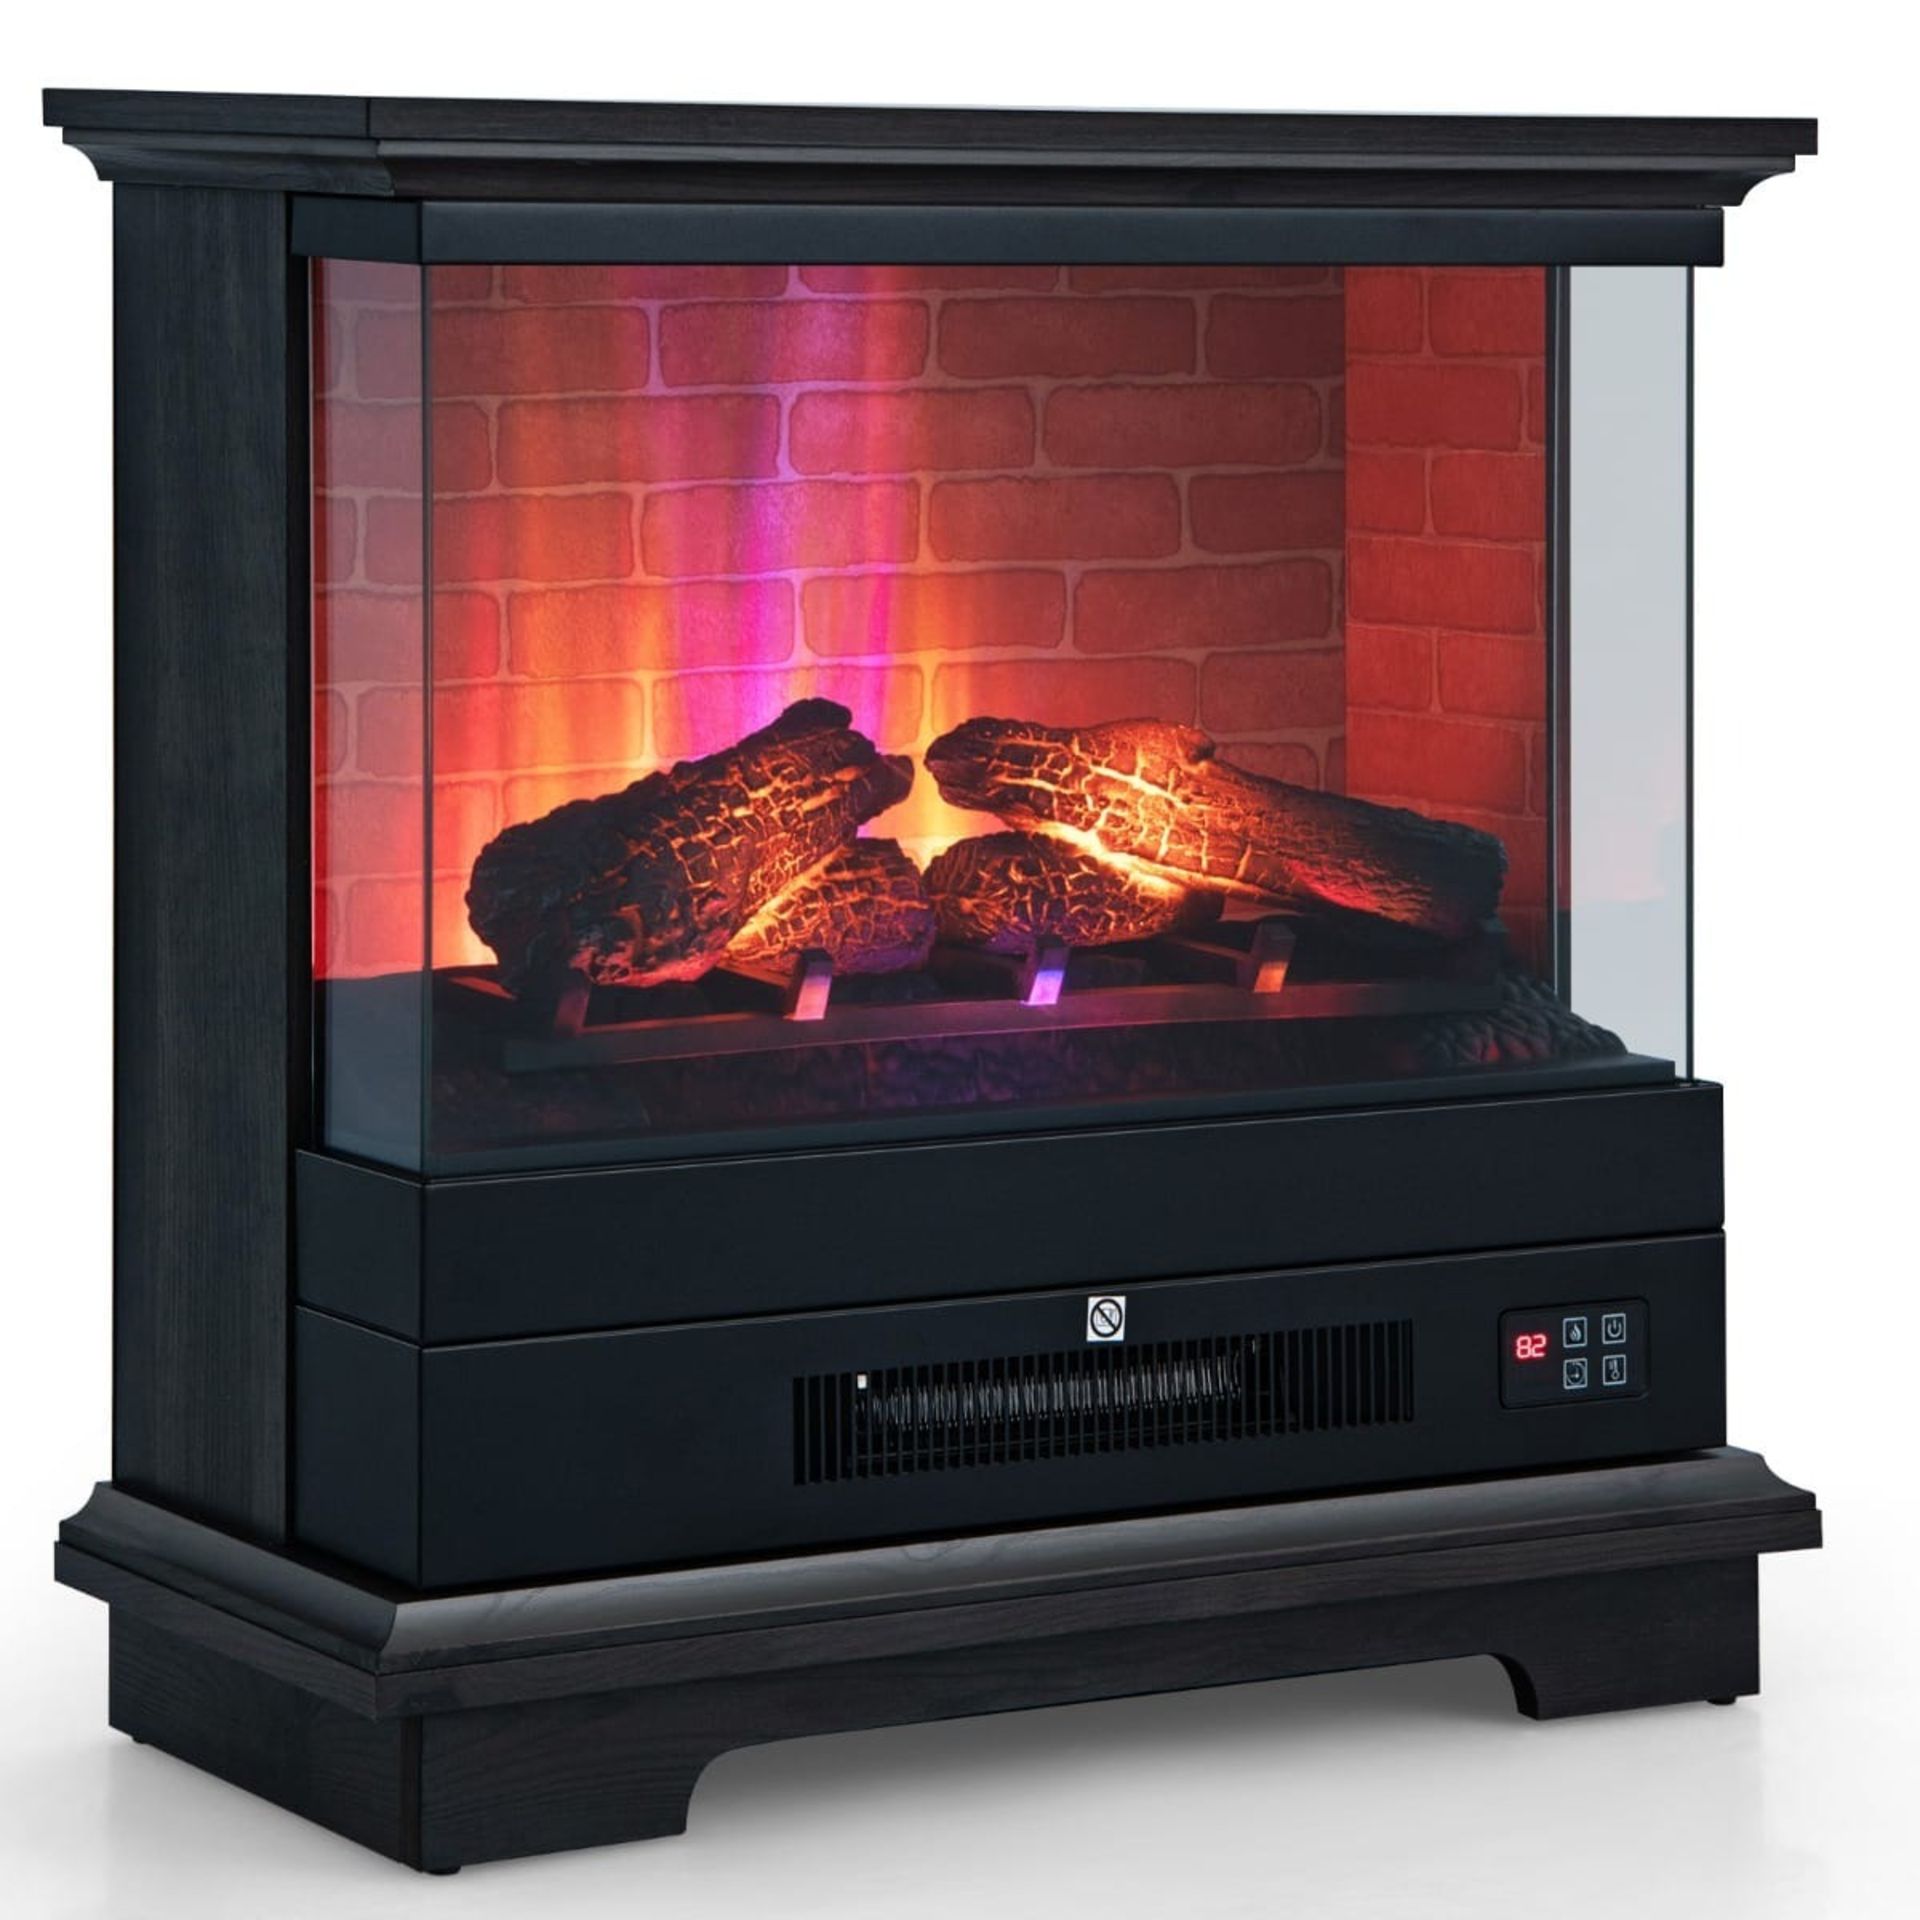 2000W Electric Fireplace Heater with 3-Level Vivid Flame-Black - ER53